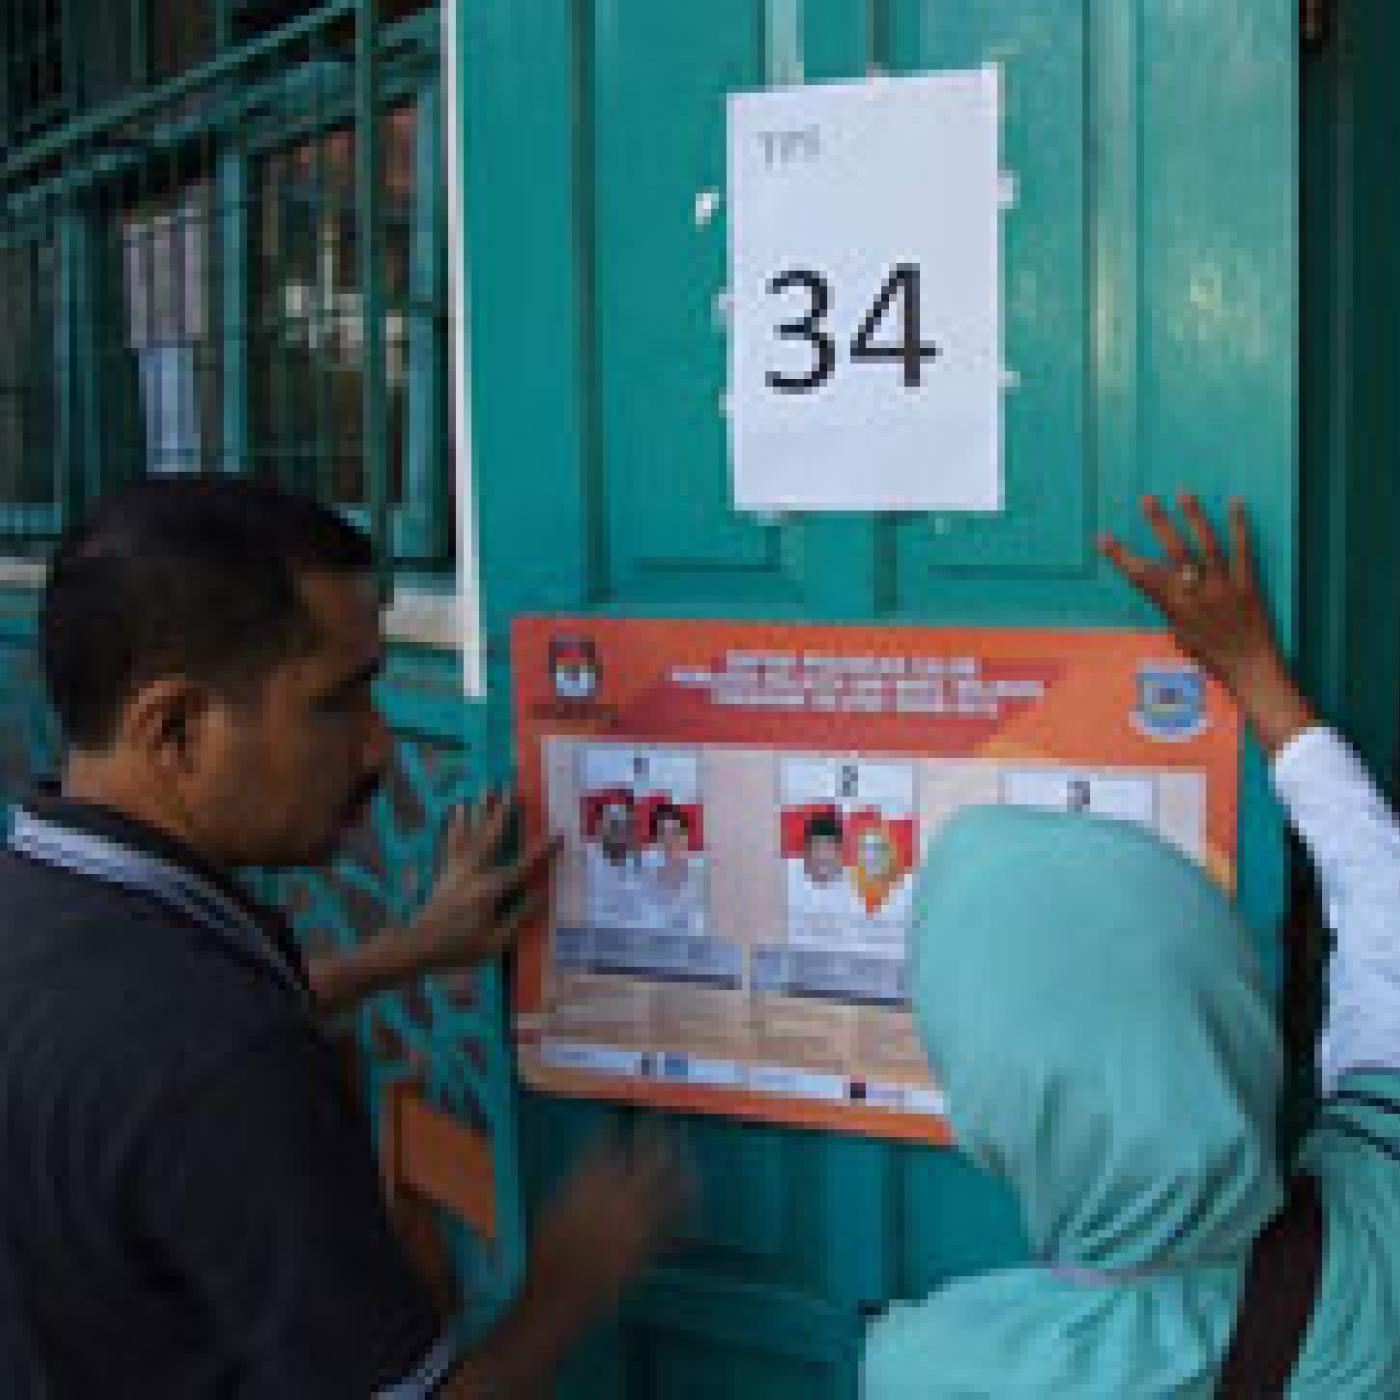 A polling station in South Tangerang during the December 9, 2015 regional elections. Photo: Kyle Lemargie, IFES. 